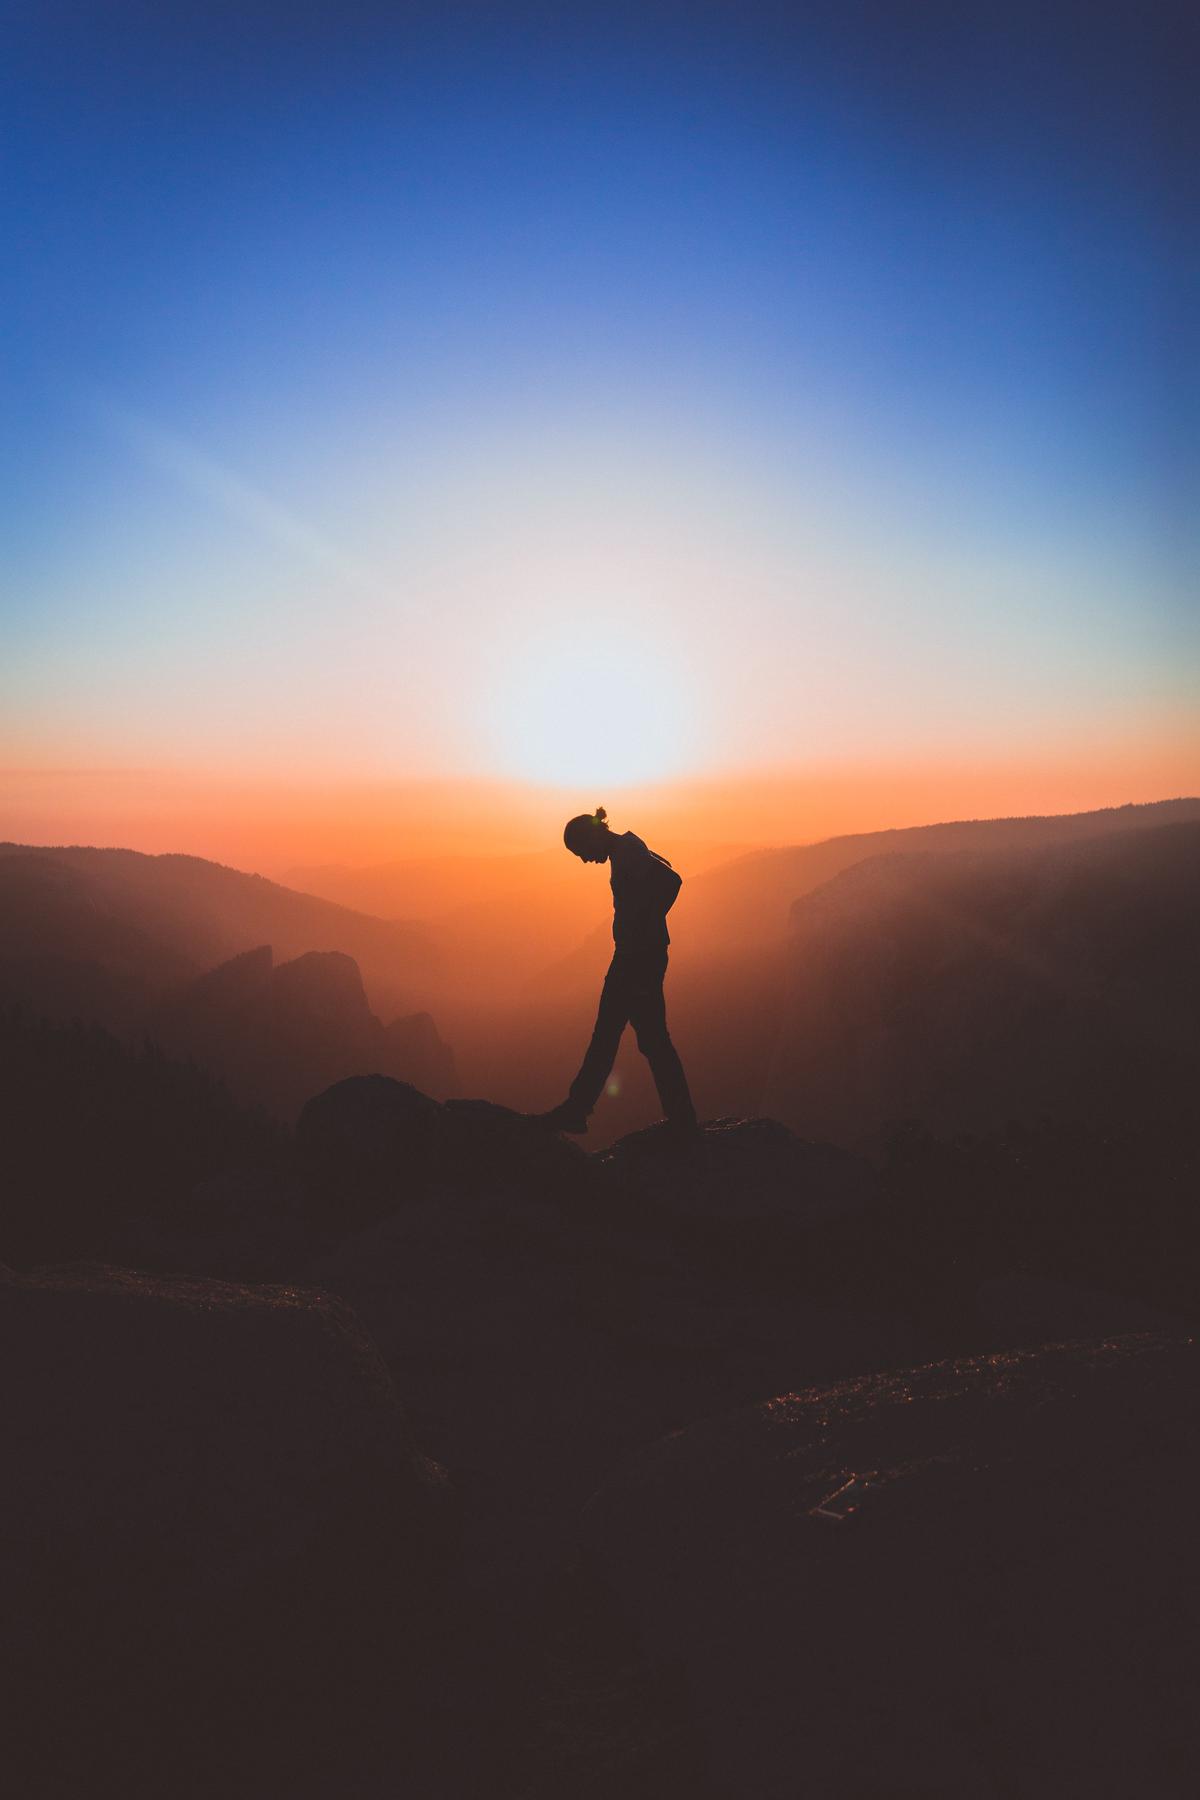 An image of a person standing on a mountain peak, looking out at the landscape before them. The image represents the idea of achieving goals through motivation and passion.